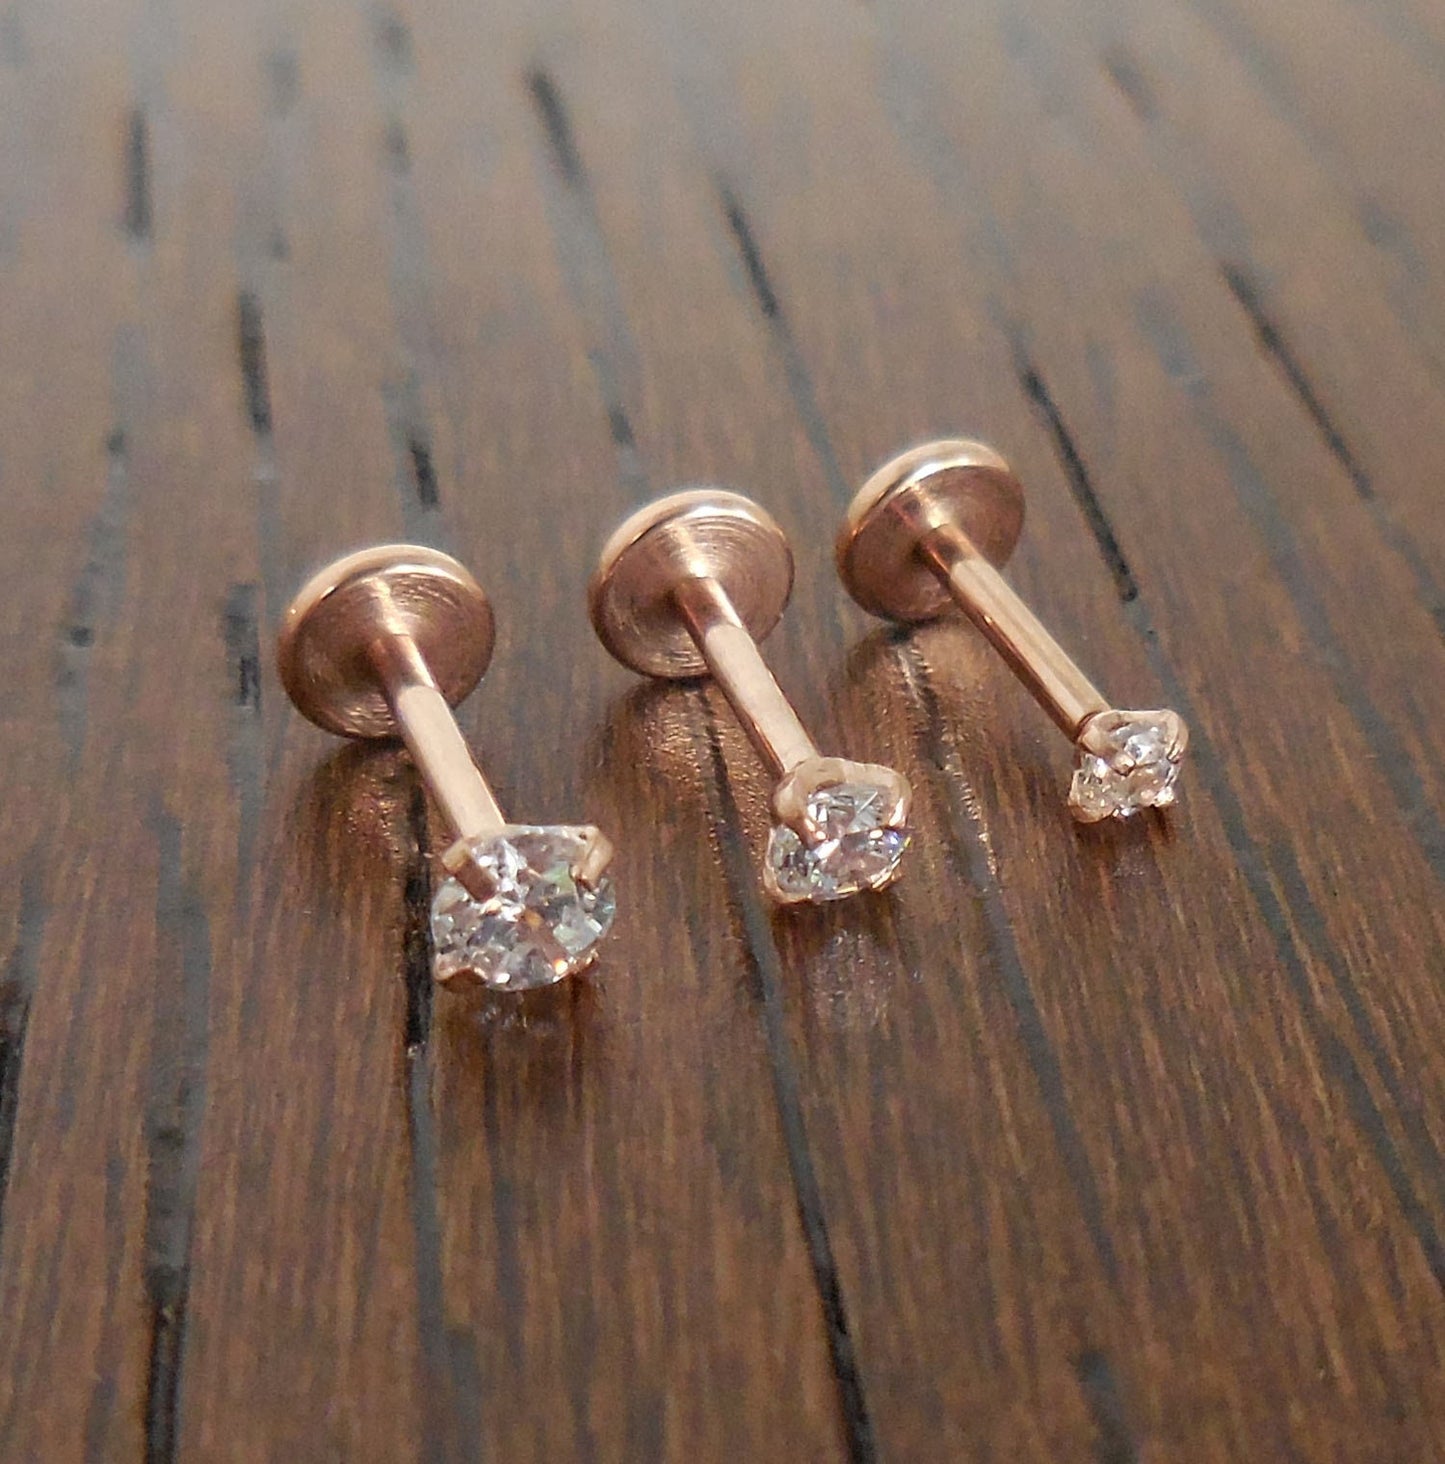 Tragus Threadless Push Pin 6mm-8mm Nose Ring 18g Prong Set Clear CZ 2-4mm Cartilage Earrings Rose Gold Tone Labret Triple Forward Helix